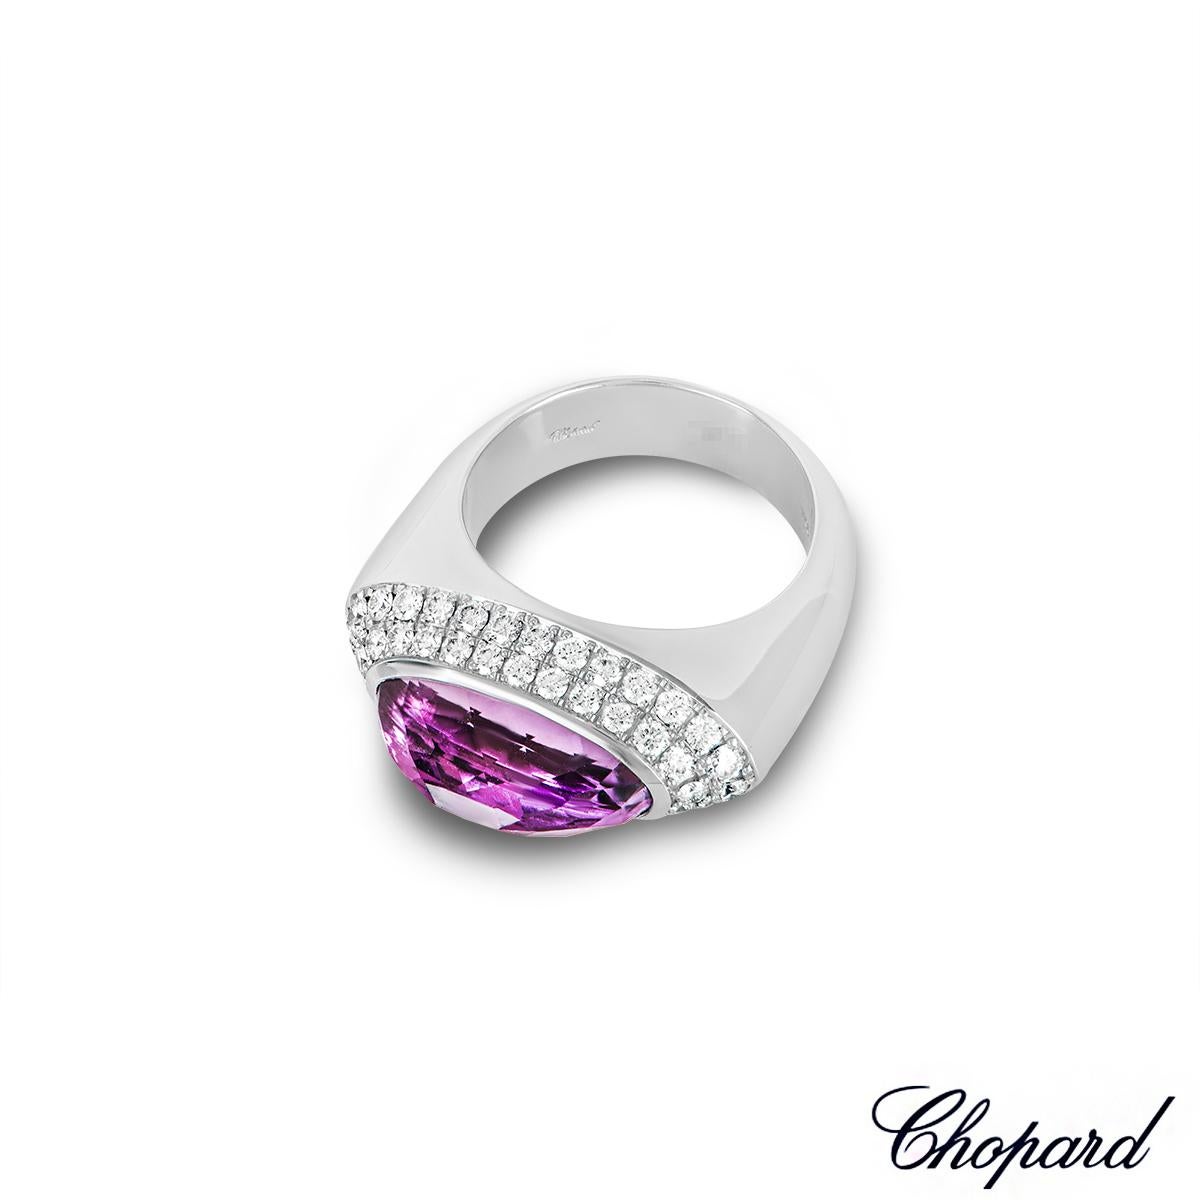 Chopard White Gold Amethyst & Diamond Ring 82/3839-1110 In New Condition For Sale In London, GB